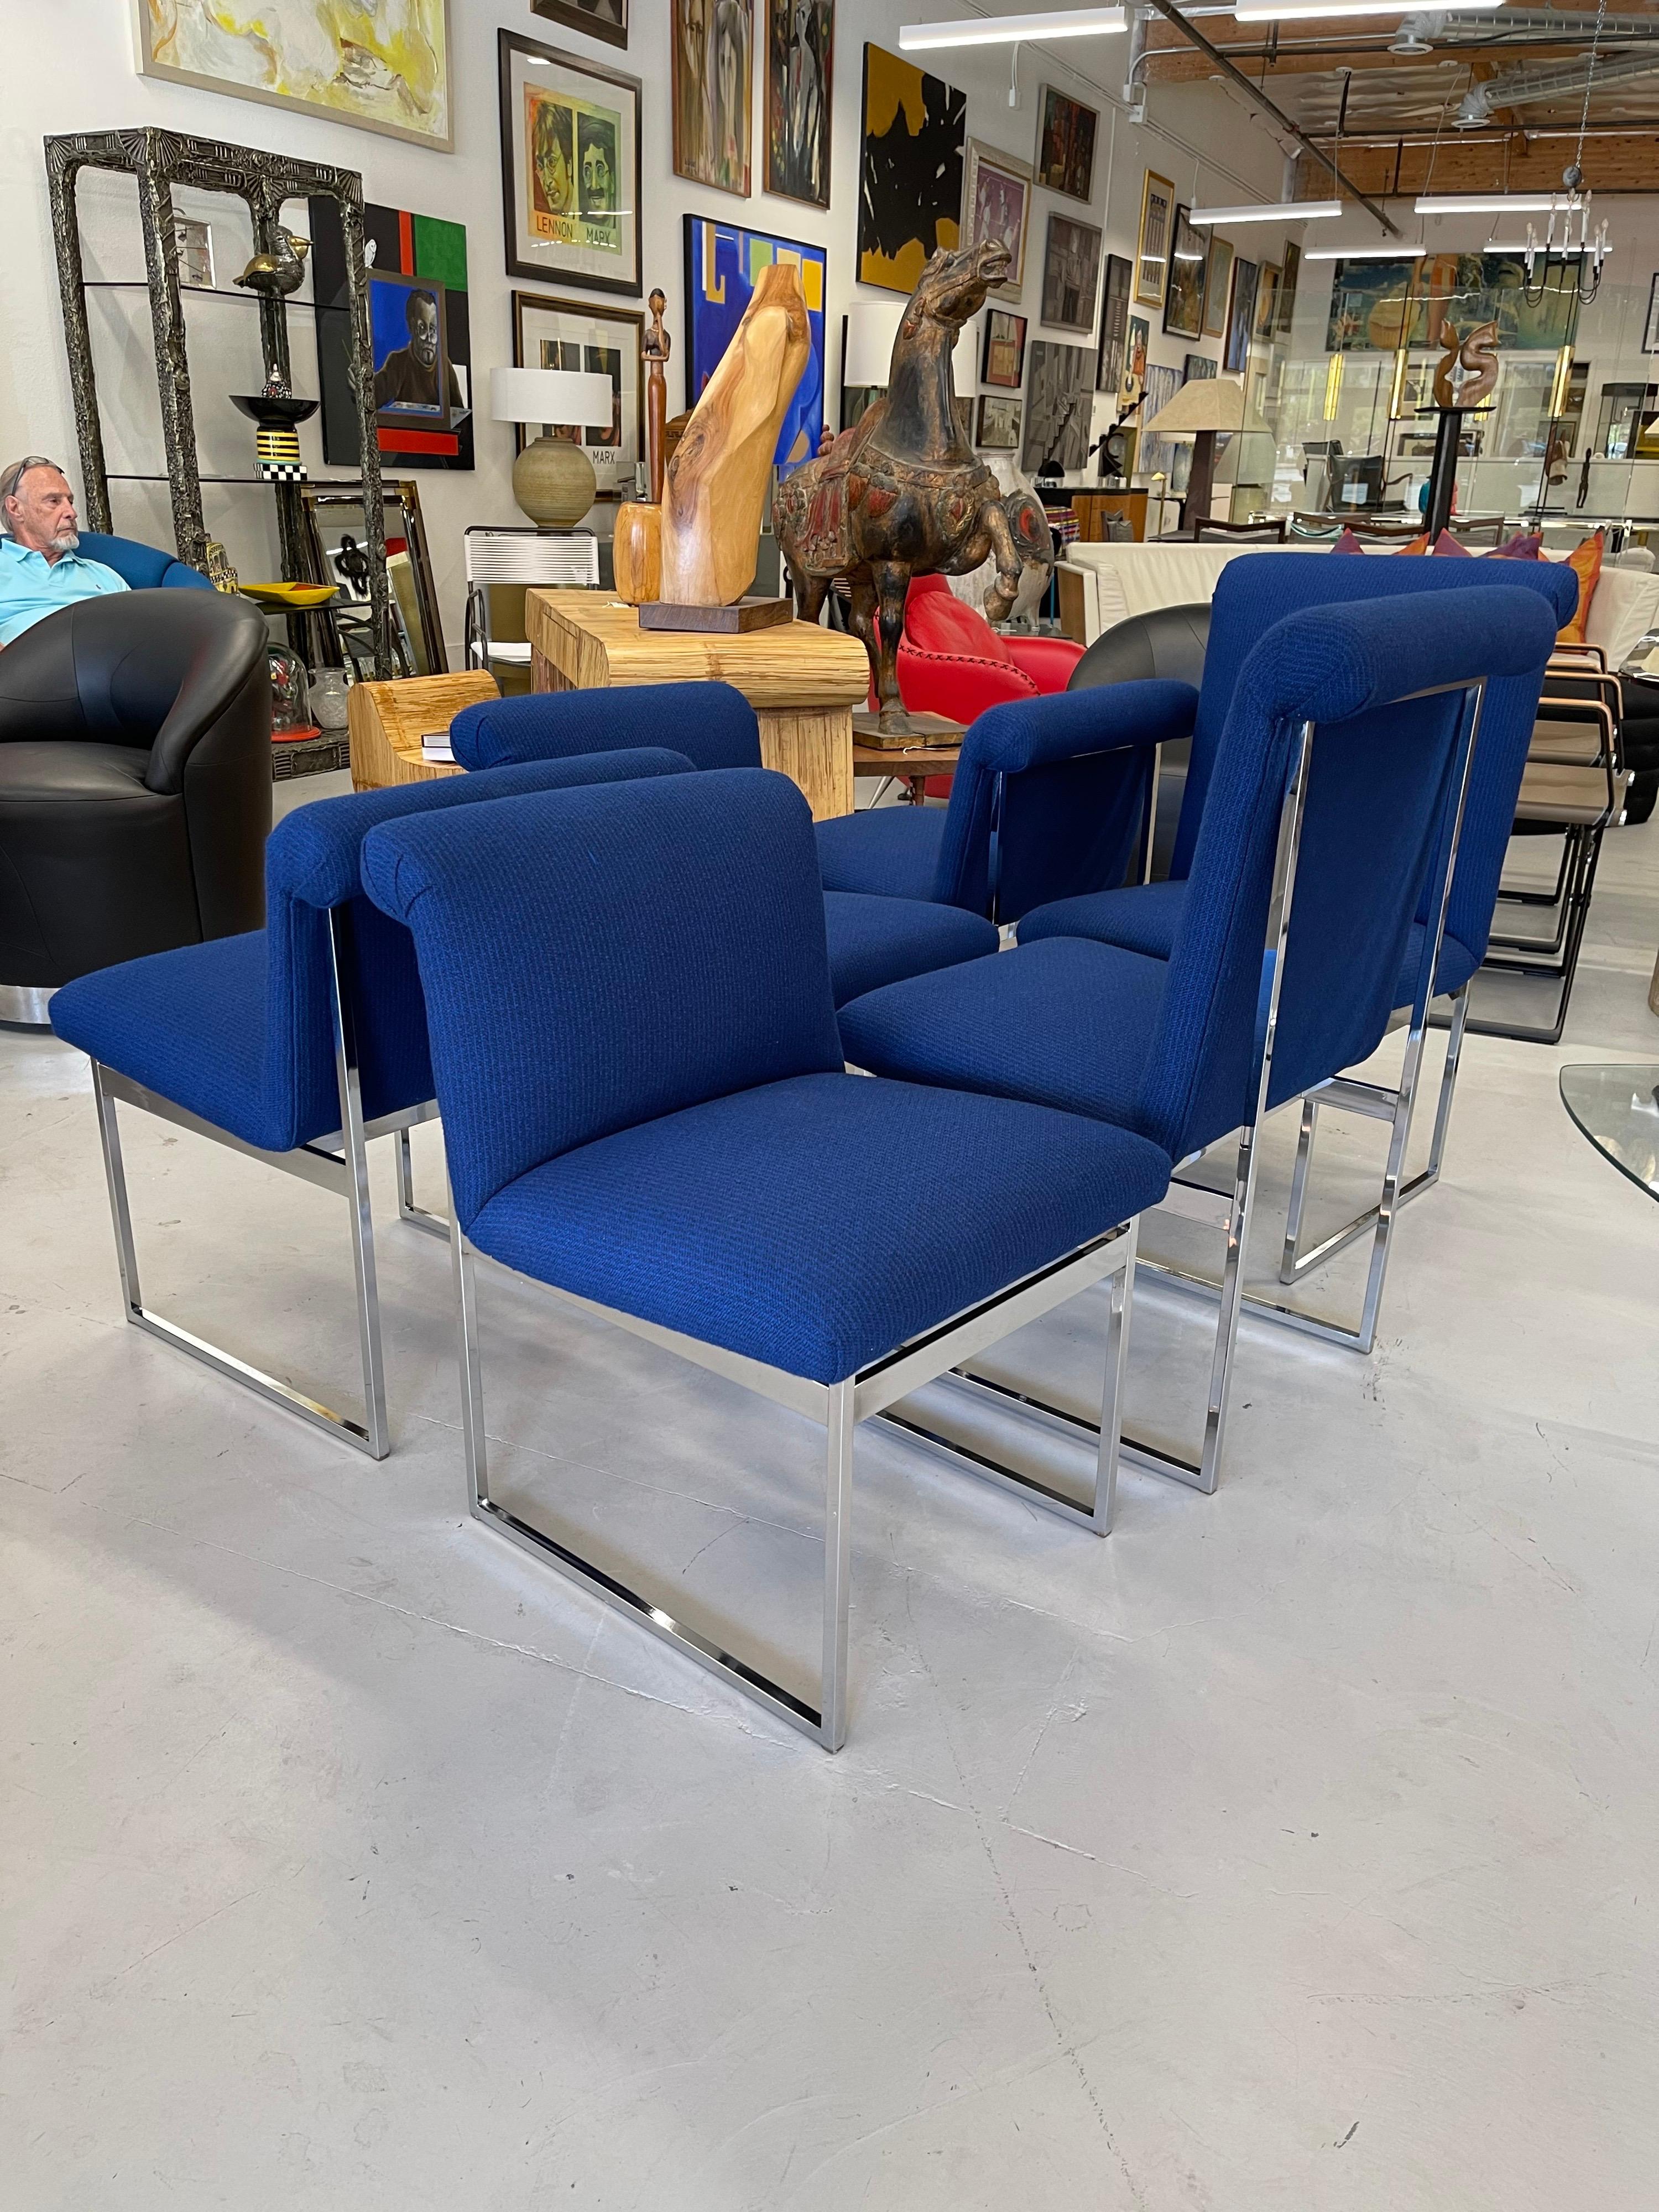 A set of 6 beautiful dining chairs in royal blue wool with chrome legs, attributed to Milo Baughman for Thayer Coggin. 2 of the chairs are high back at 37.5 inches tall and the other 4 are 29.5 inches tall. they are the same in all other dimensions.